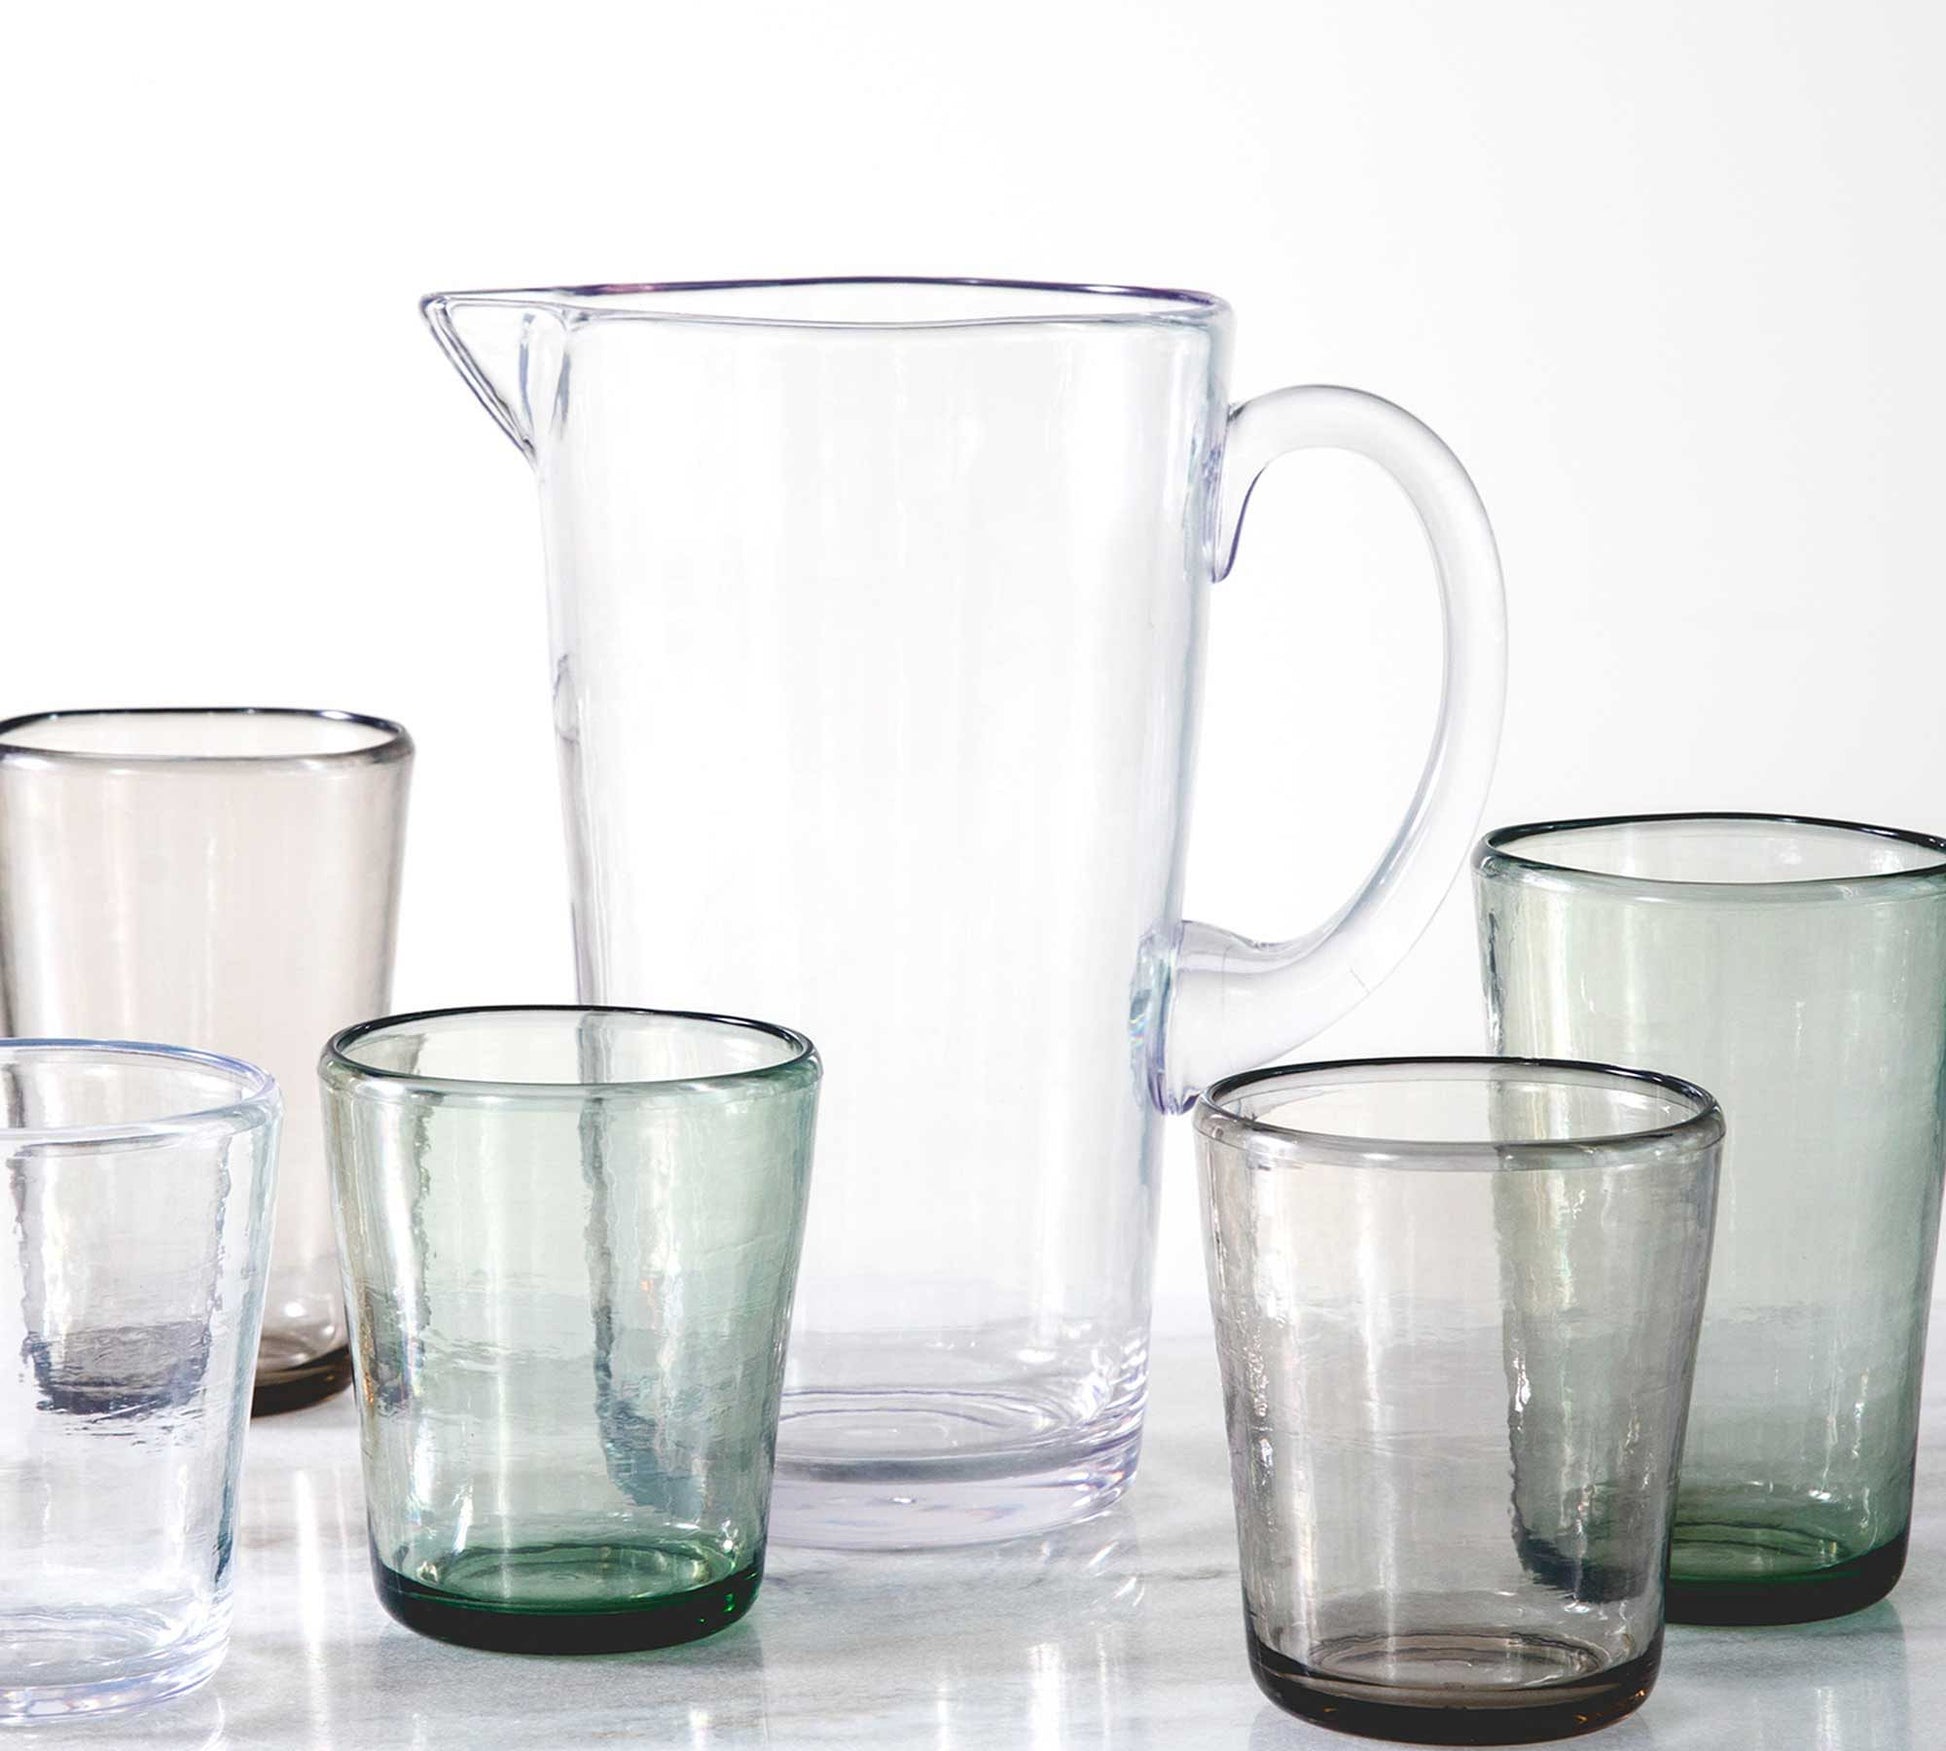 clear pitcher surrounded by assorted glasses on white background.